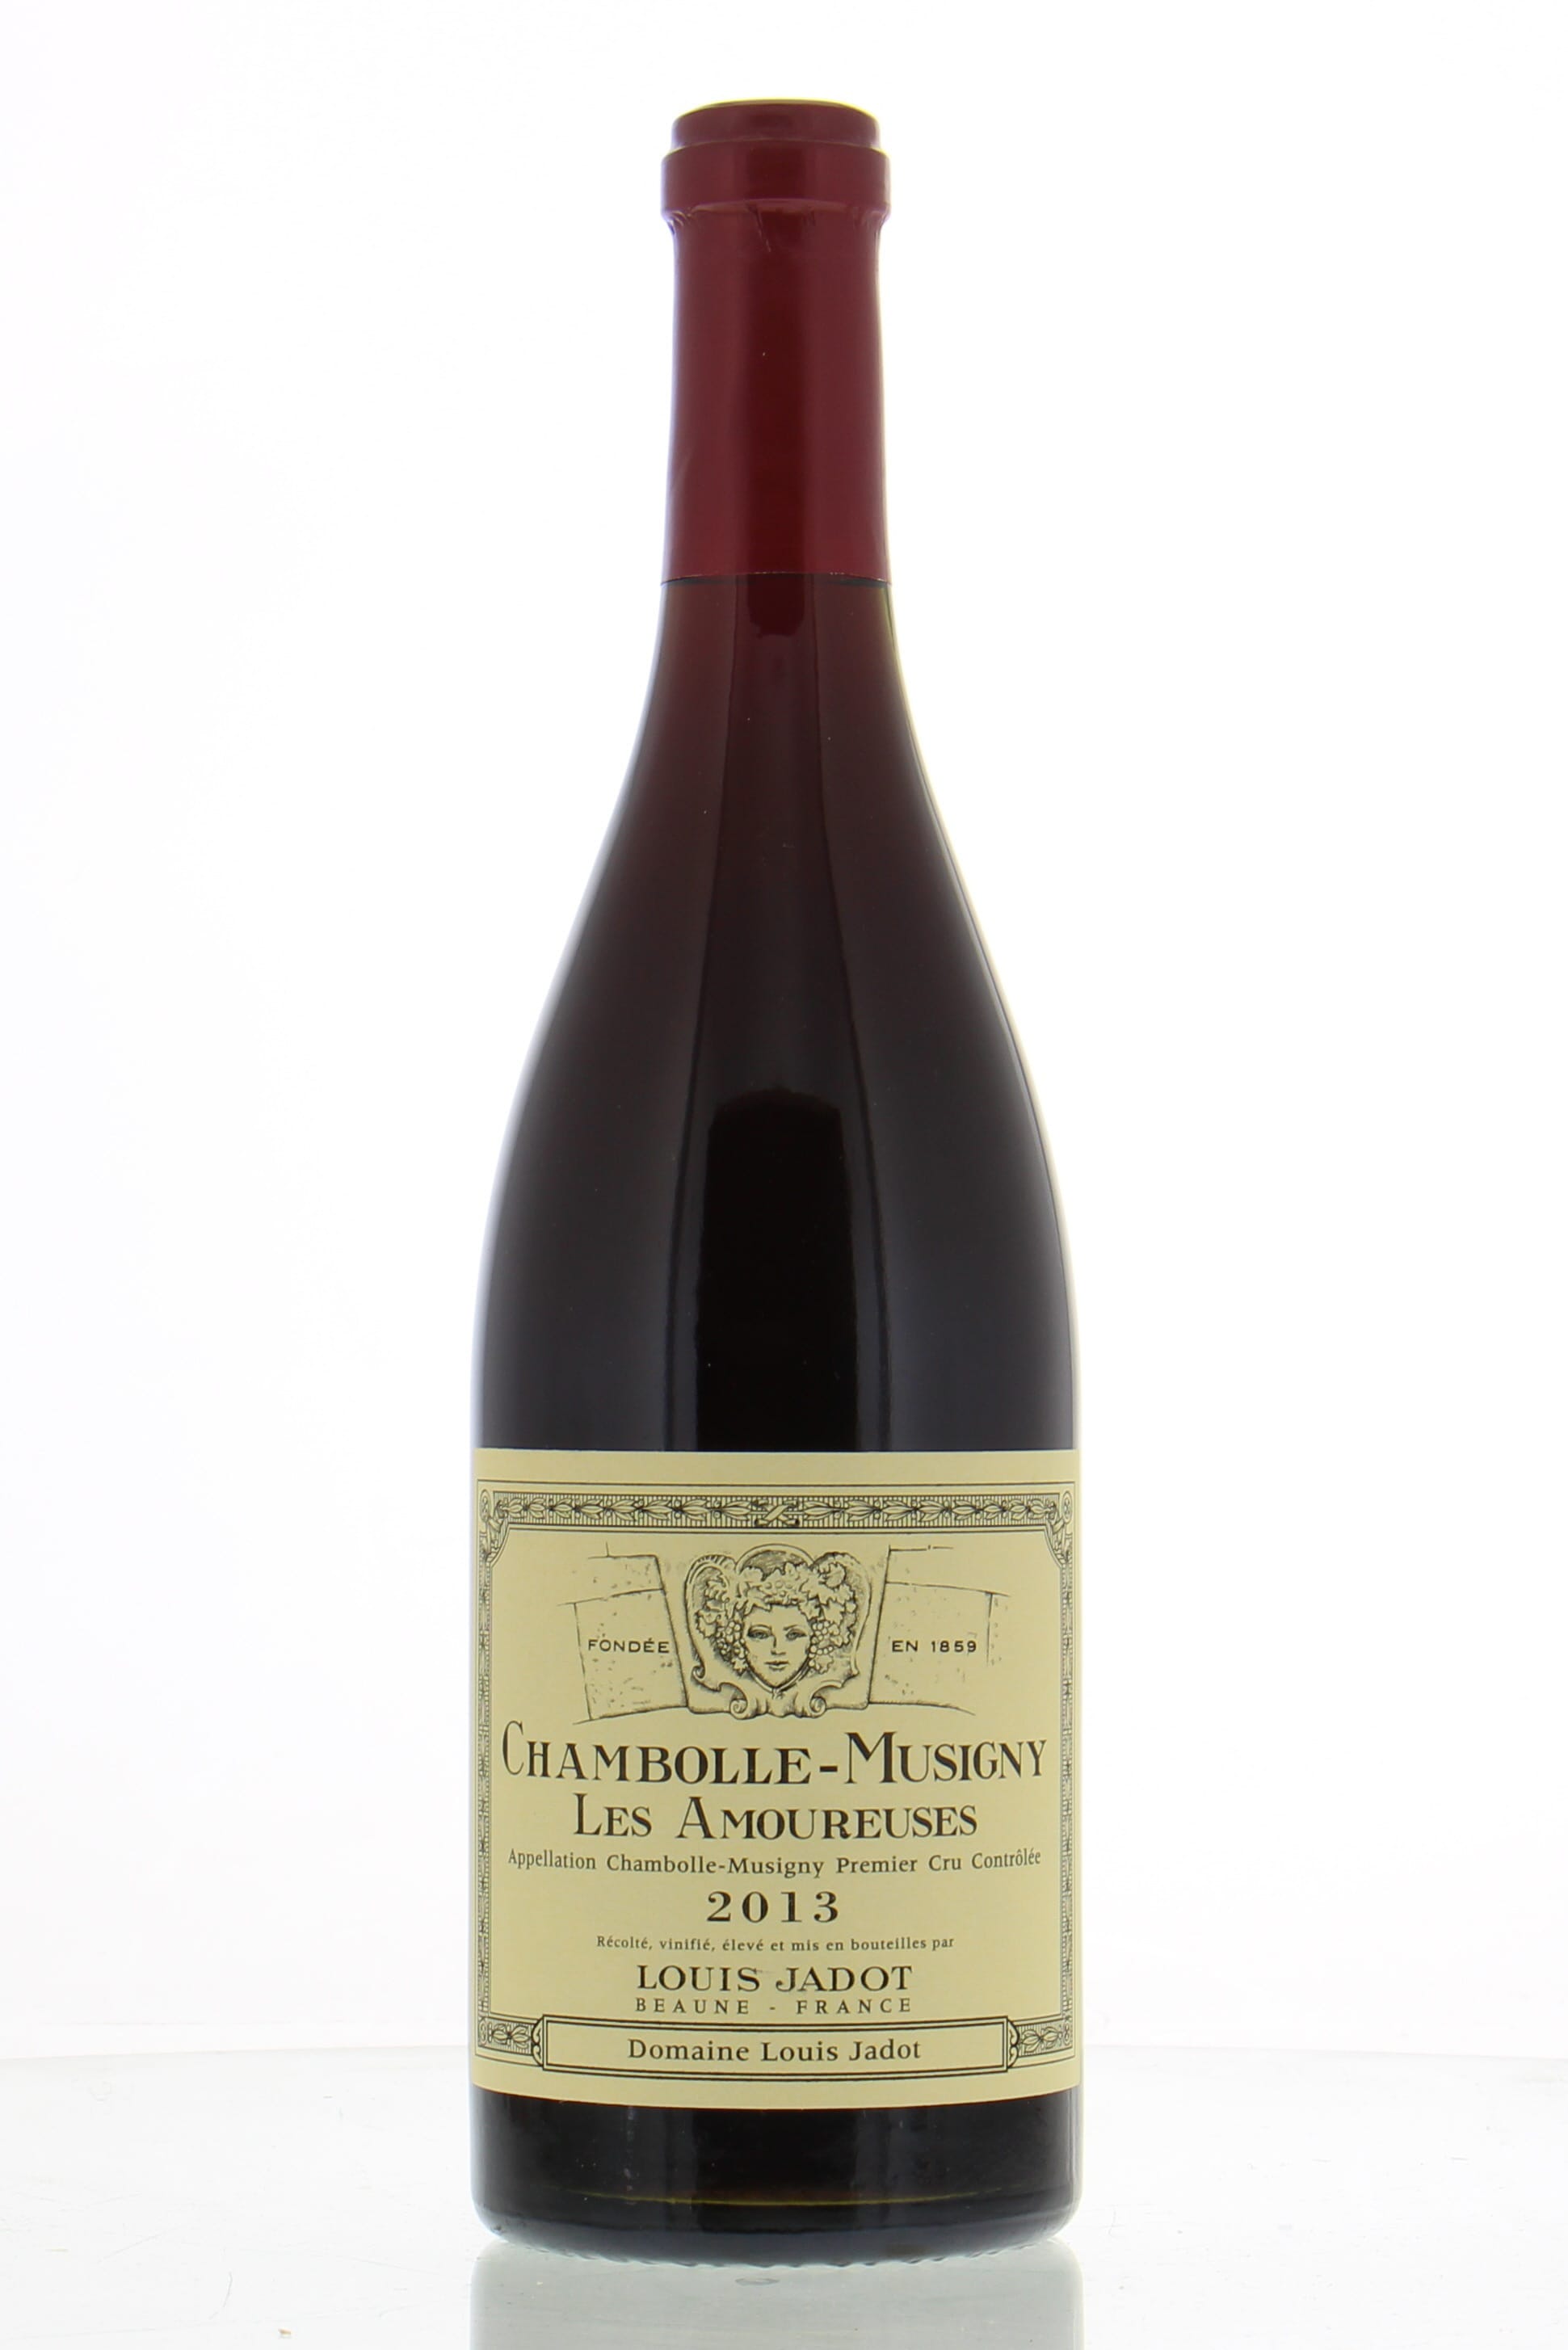 Jadot - Chambolle Musigny les Amoureuses 2013